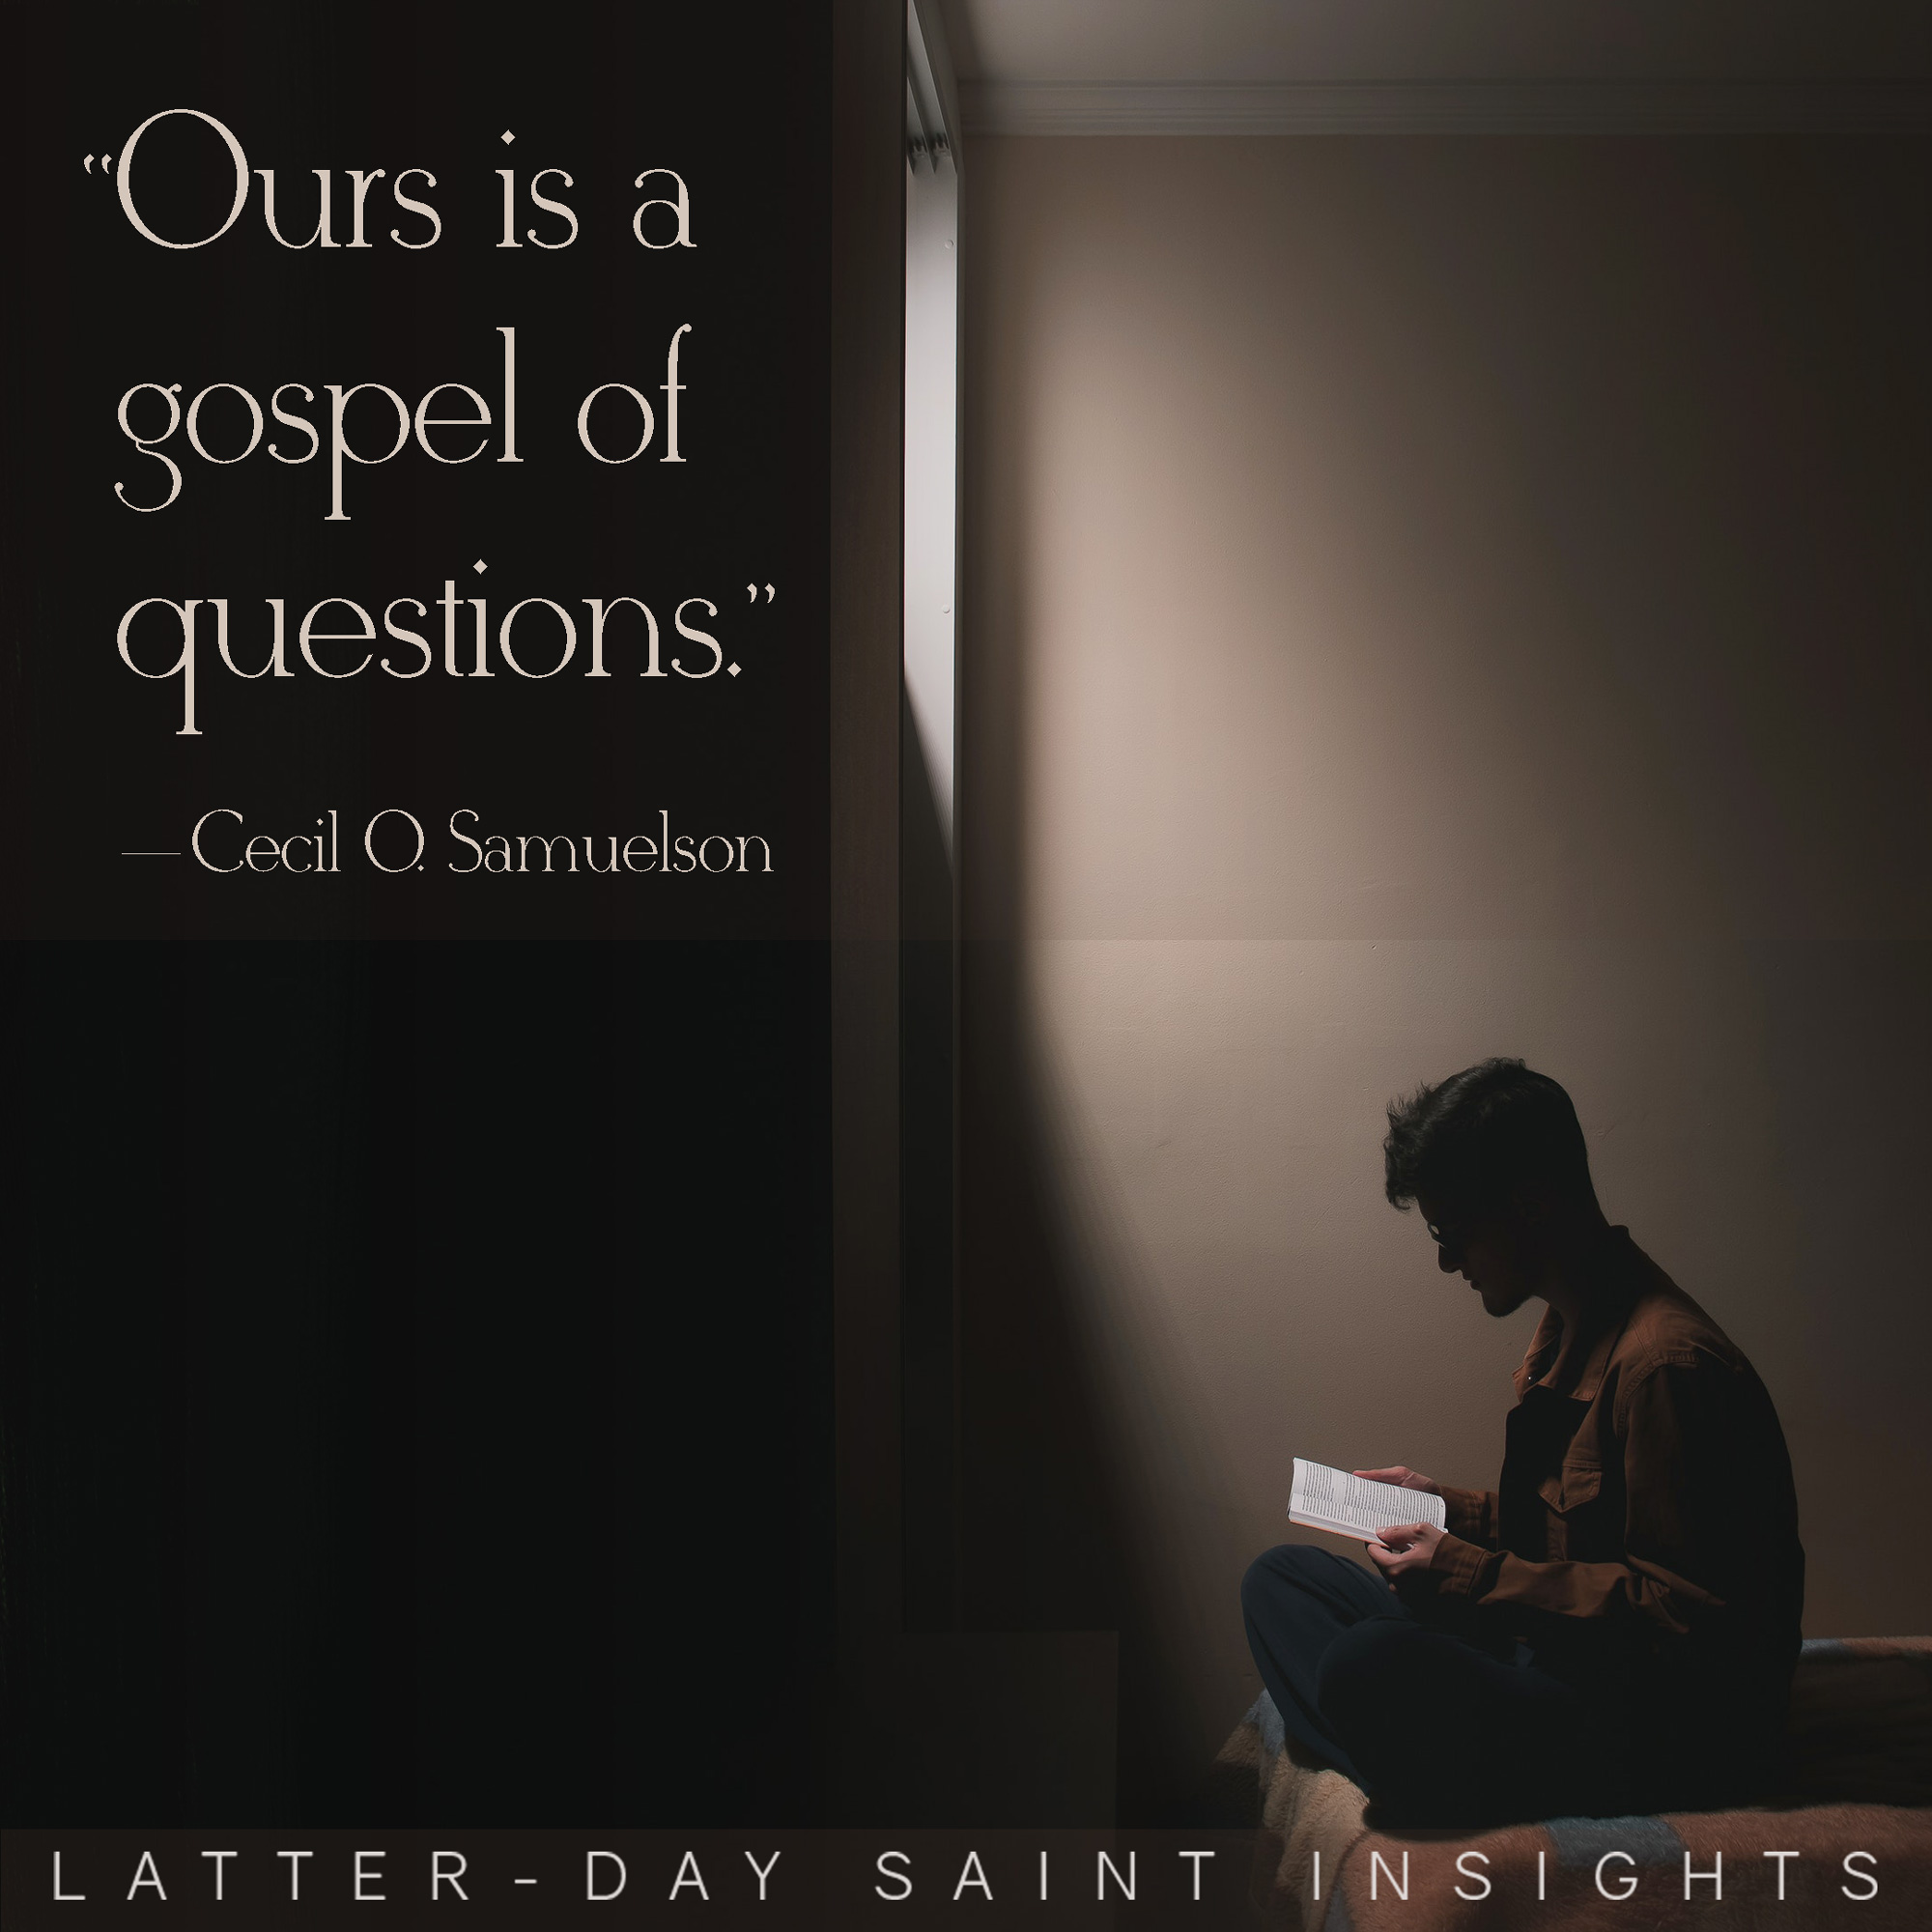 “Ours is a gospel of questions.” —Cecil O. Samuelson